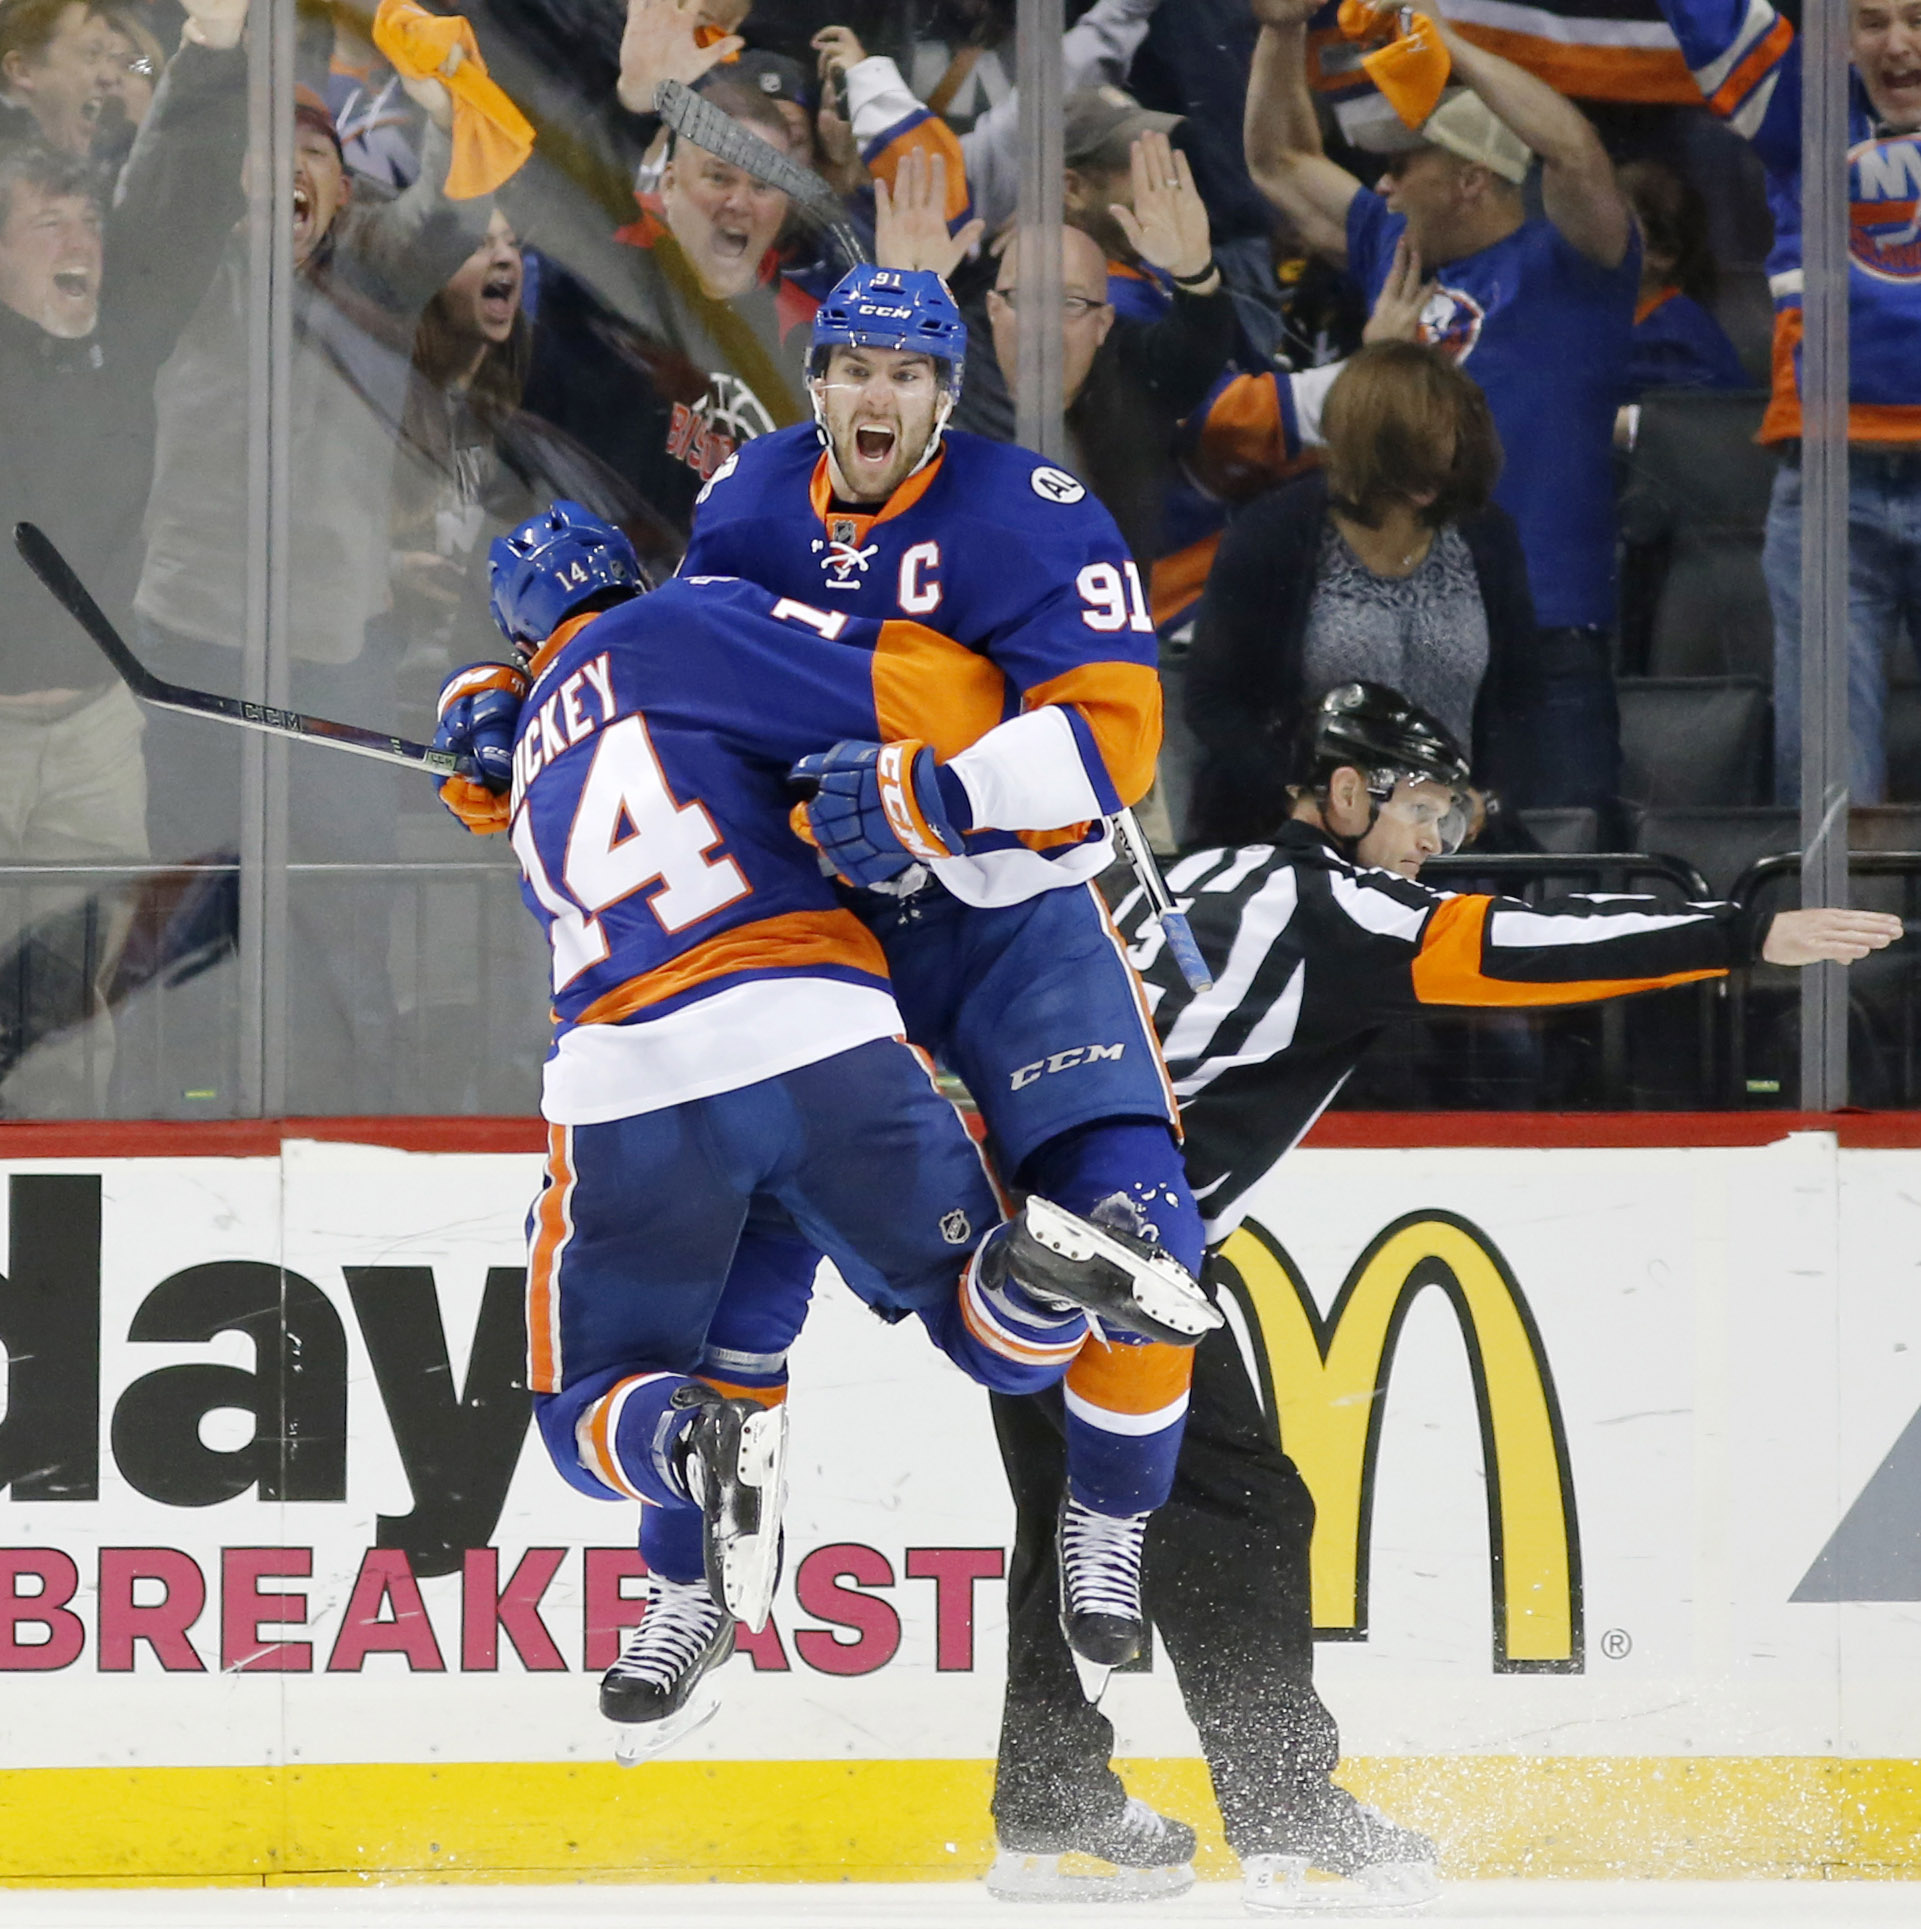 New York Islanders defenseman Thomas Hickey (14) leaps in the air with New York Islanders center John Tavares (91) after Tavares scored the winning goal in the second overtime period of Game 6 of an NHL hockey first-round Stanley Cup playoff series against the Florida Panthers in New York, Sunday, April 24, 2016. The Islanders defeated the 2-1. (AP Photo/Kathy Willens)